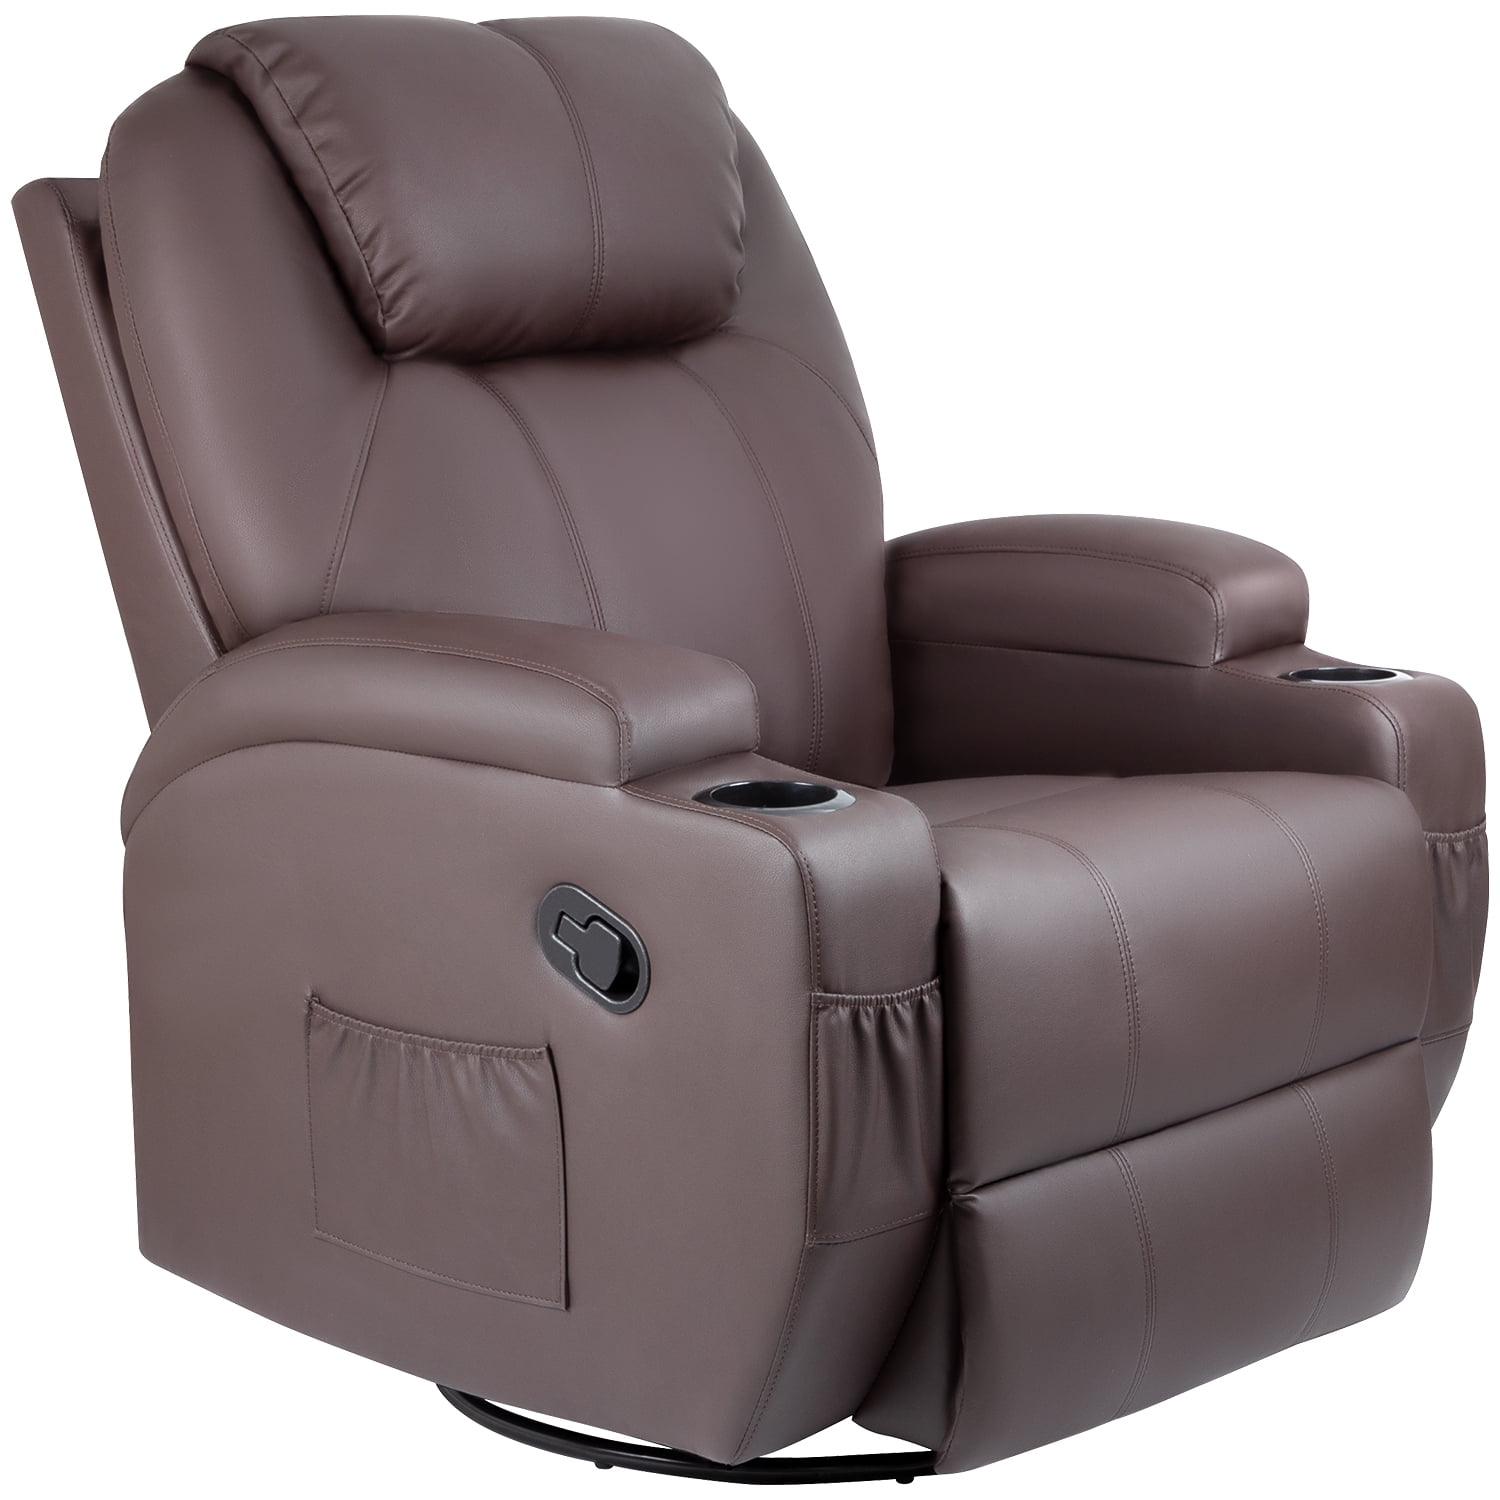 Homall Recliner Chair Massage Leather, Rooms To Go Leather Recliner